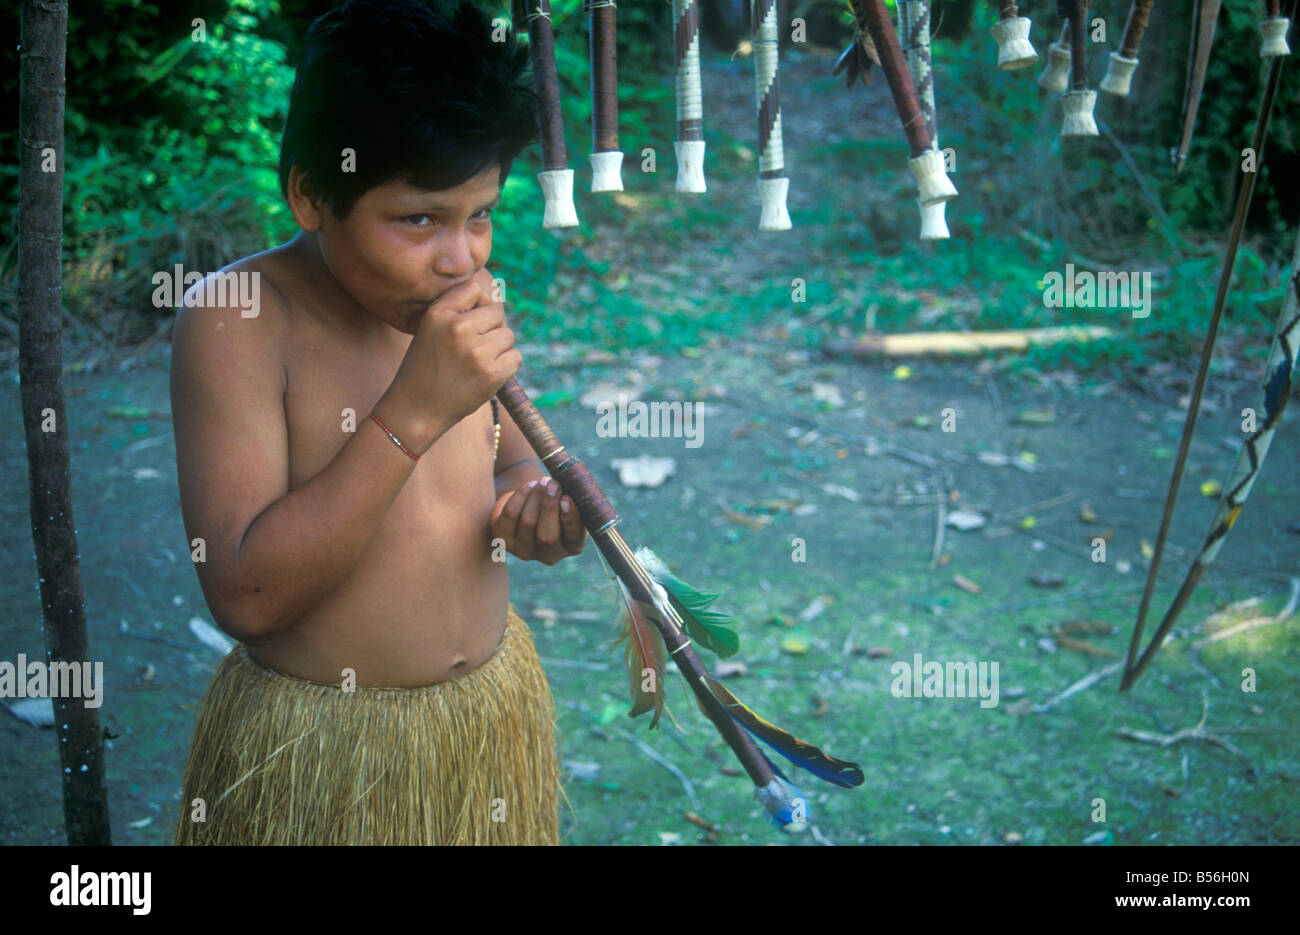 https://c8.alamy.com/comp/B56H0N/a-young-boy-presenting-a-blowtube-made-for-tourists-at-a-yagua-indian-B56H0N.jpg